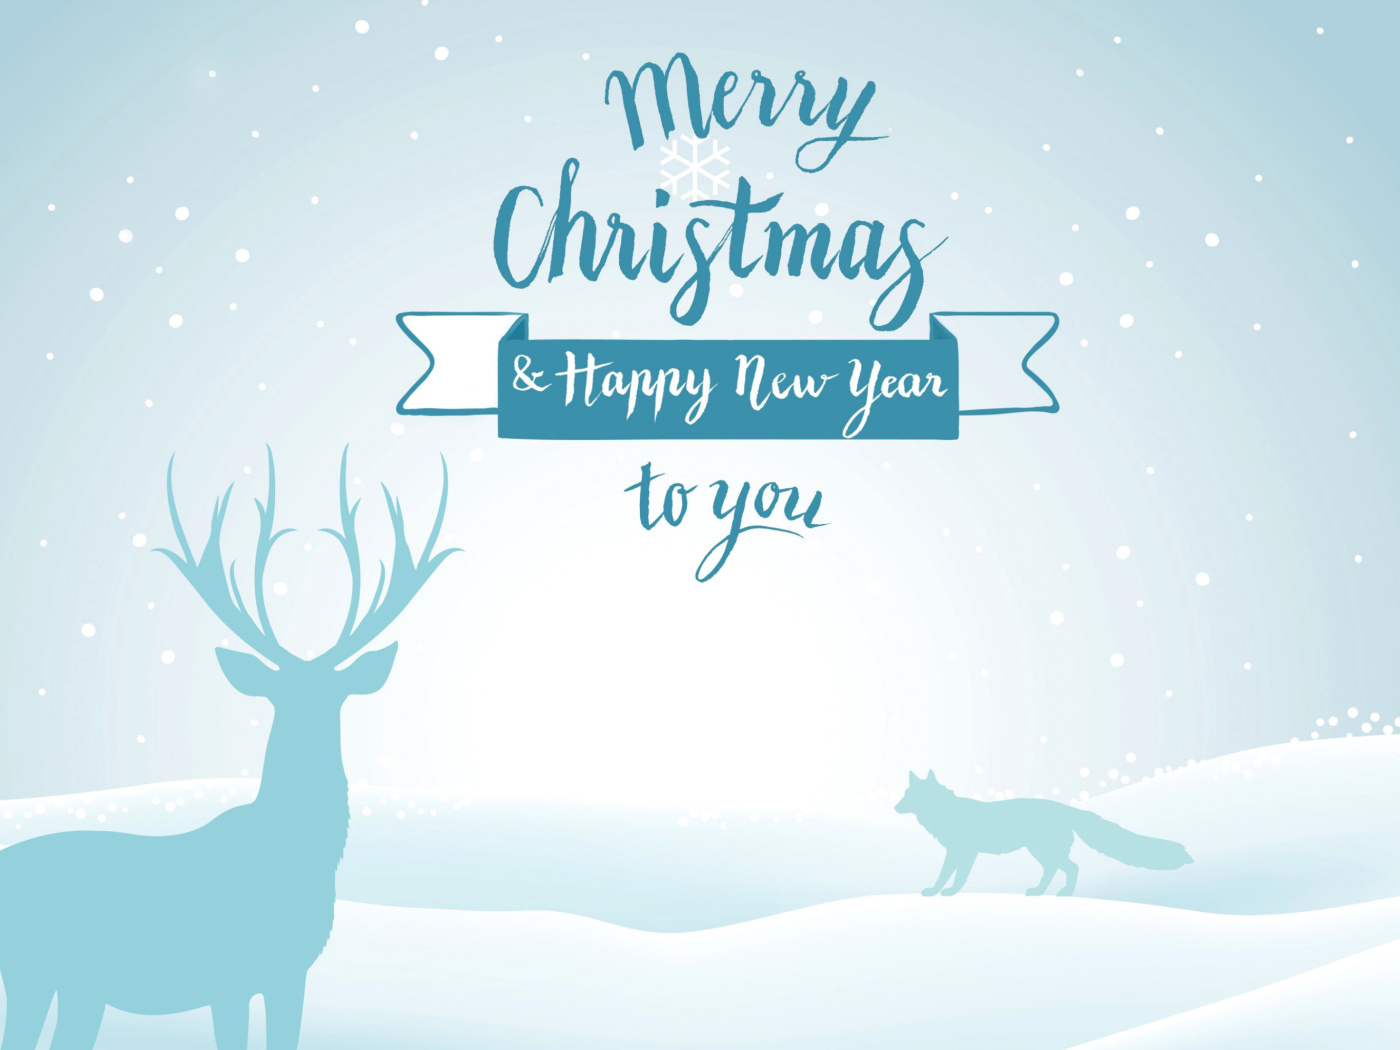 Merry Christmas and Happy New Year wallpaper 1400x1050